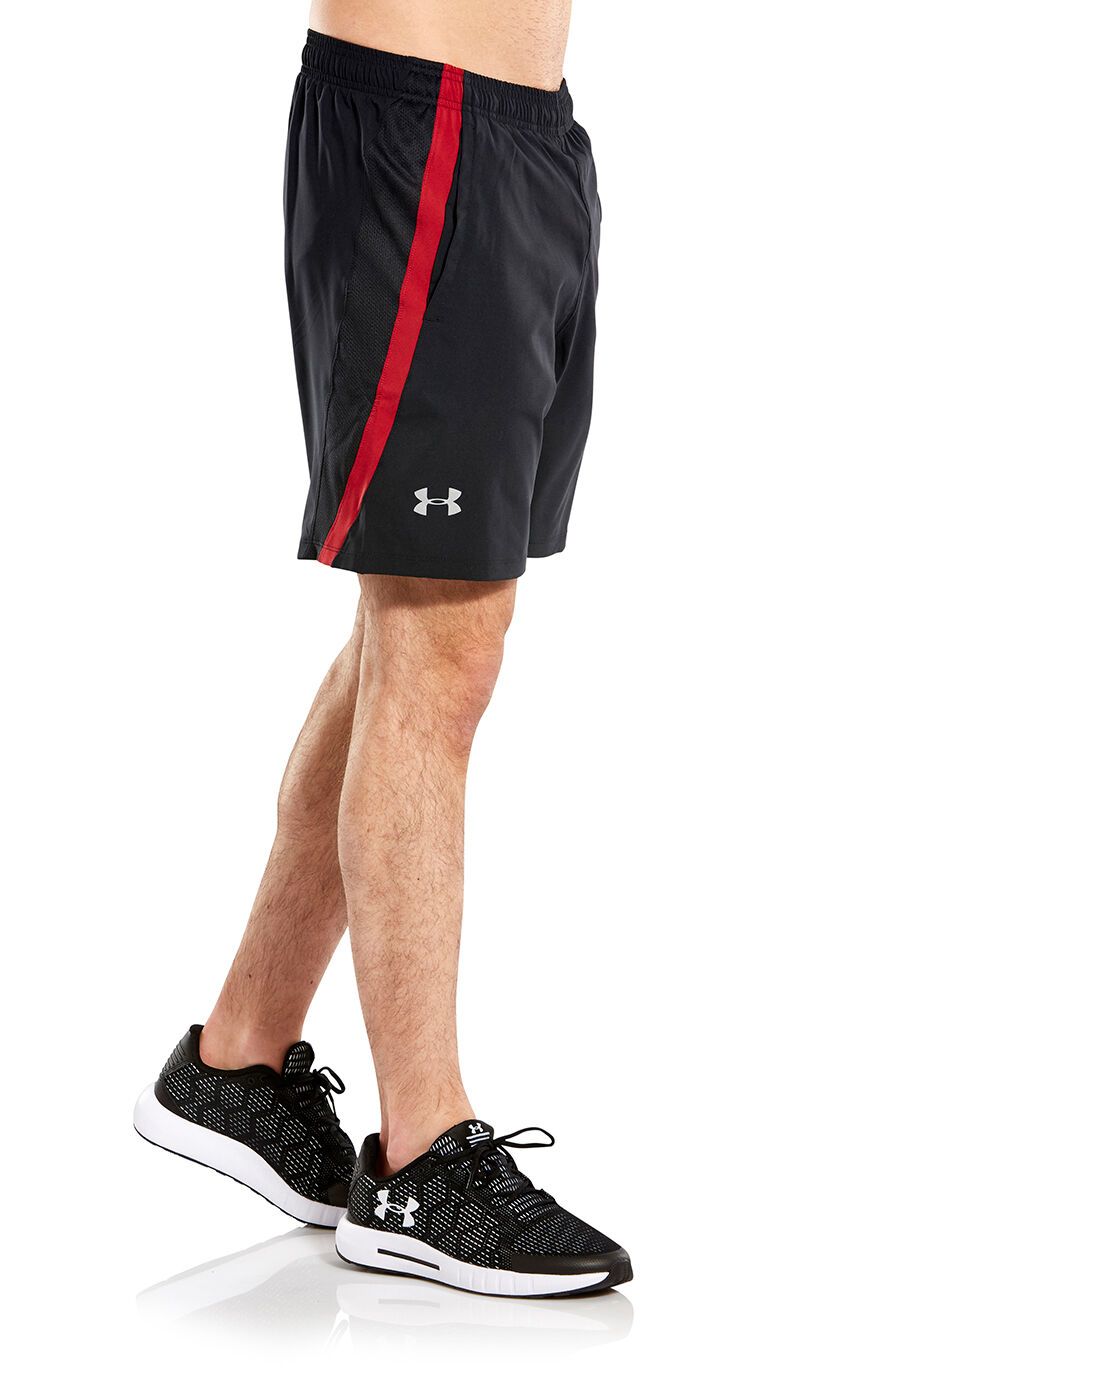 mens red under armour shorts